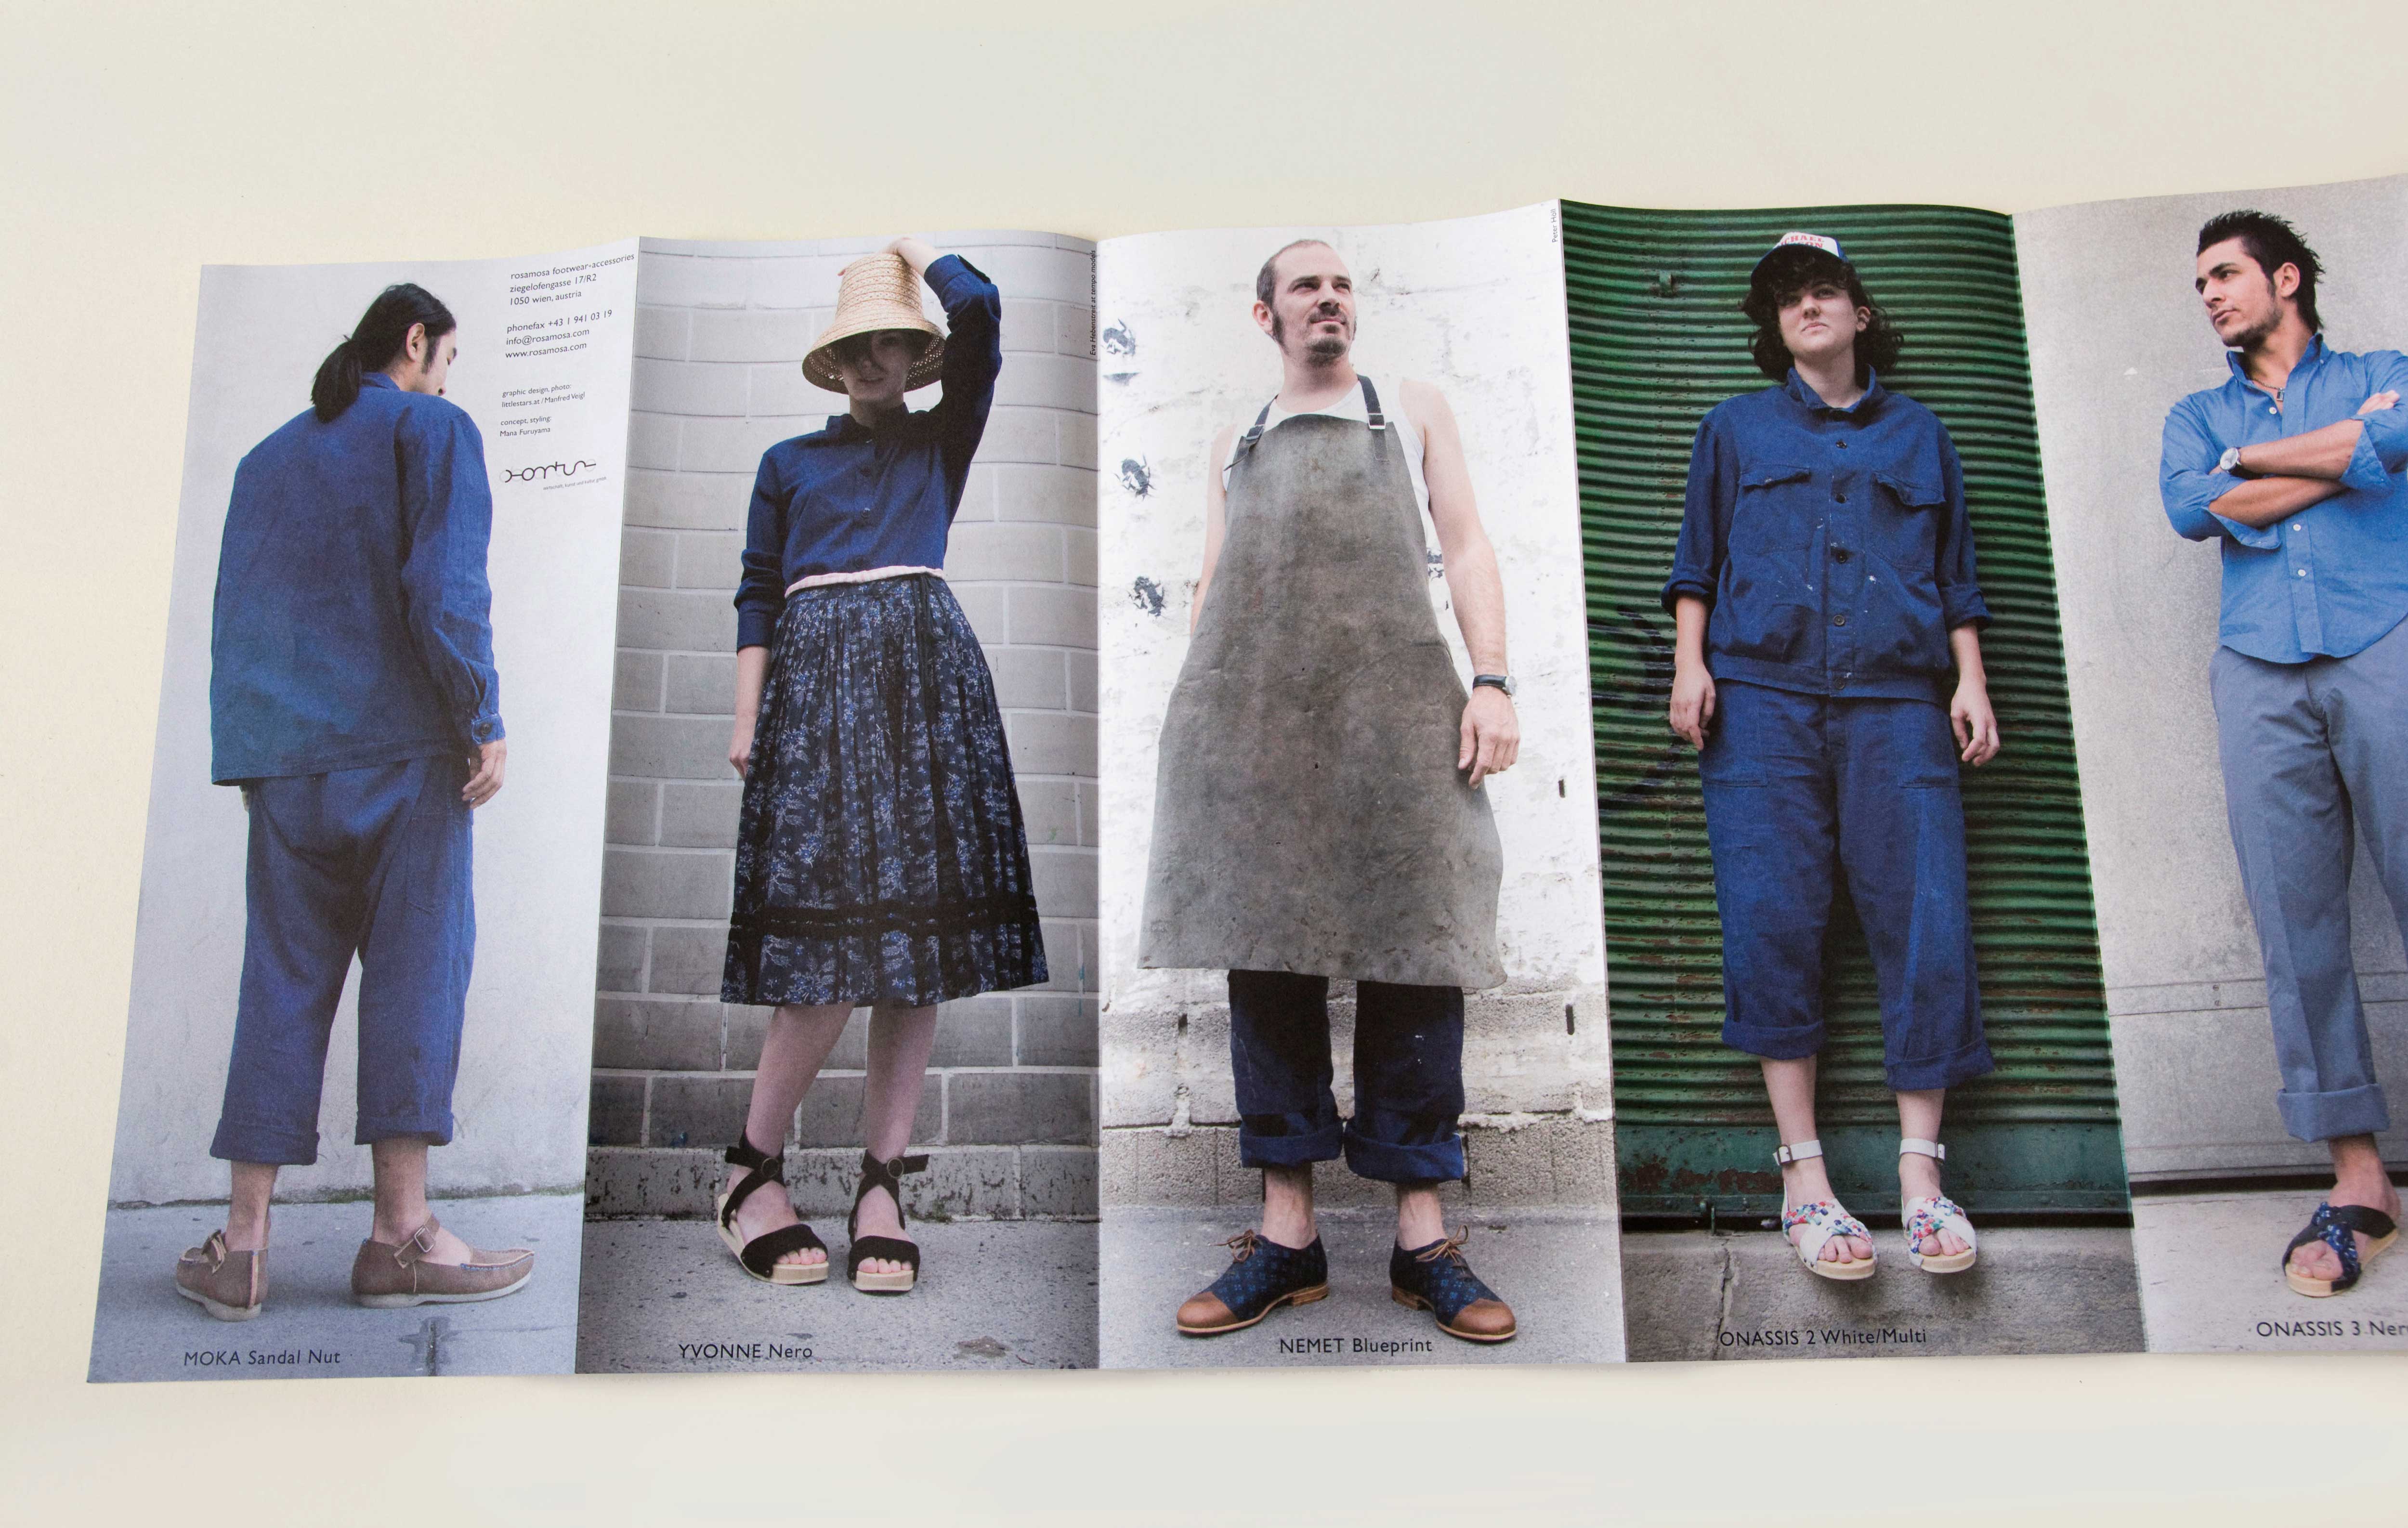 Unfolded brochure. Full-page photos side by side. Women and men standing on the street in front of various backgrounds. Brick wall, wall with tags, old shutter or a garage door. Small font overlayed at bottom of each photo.